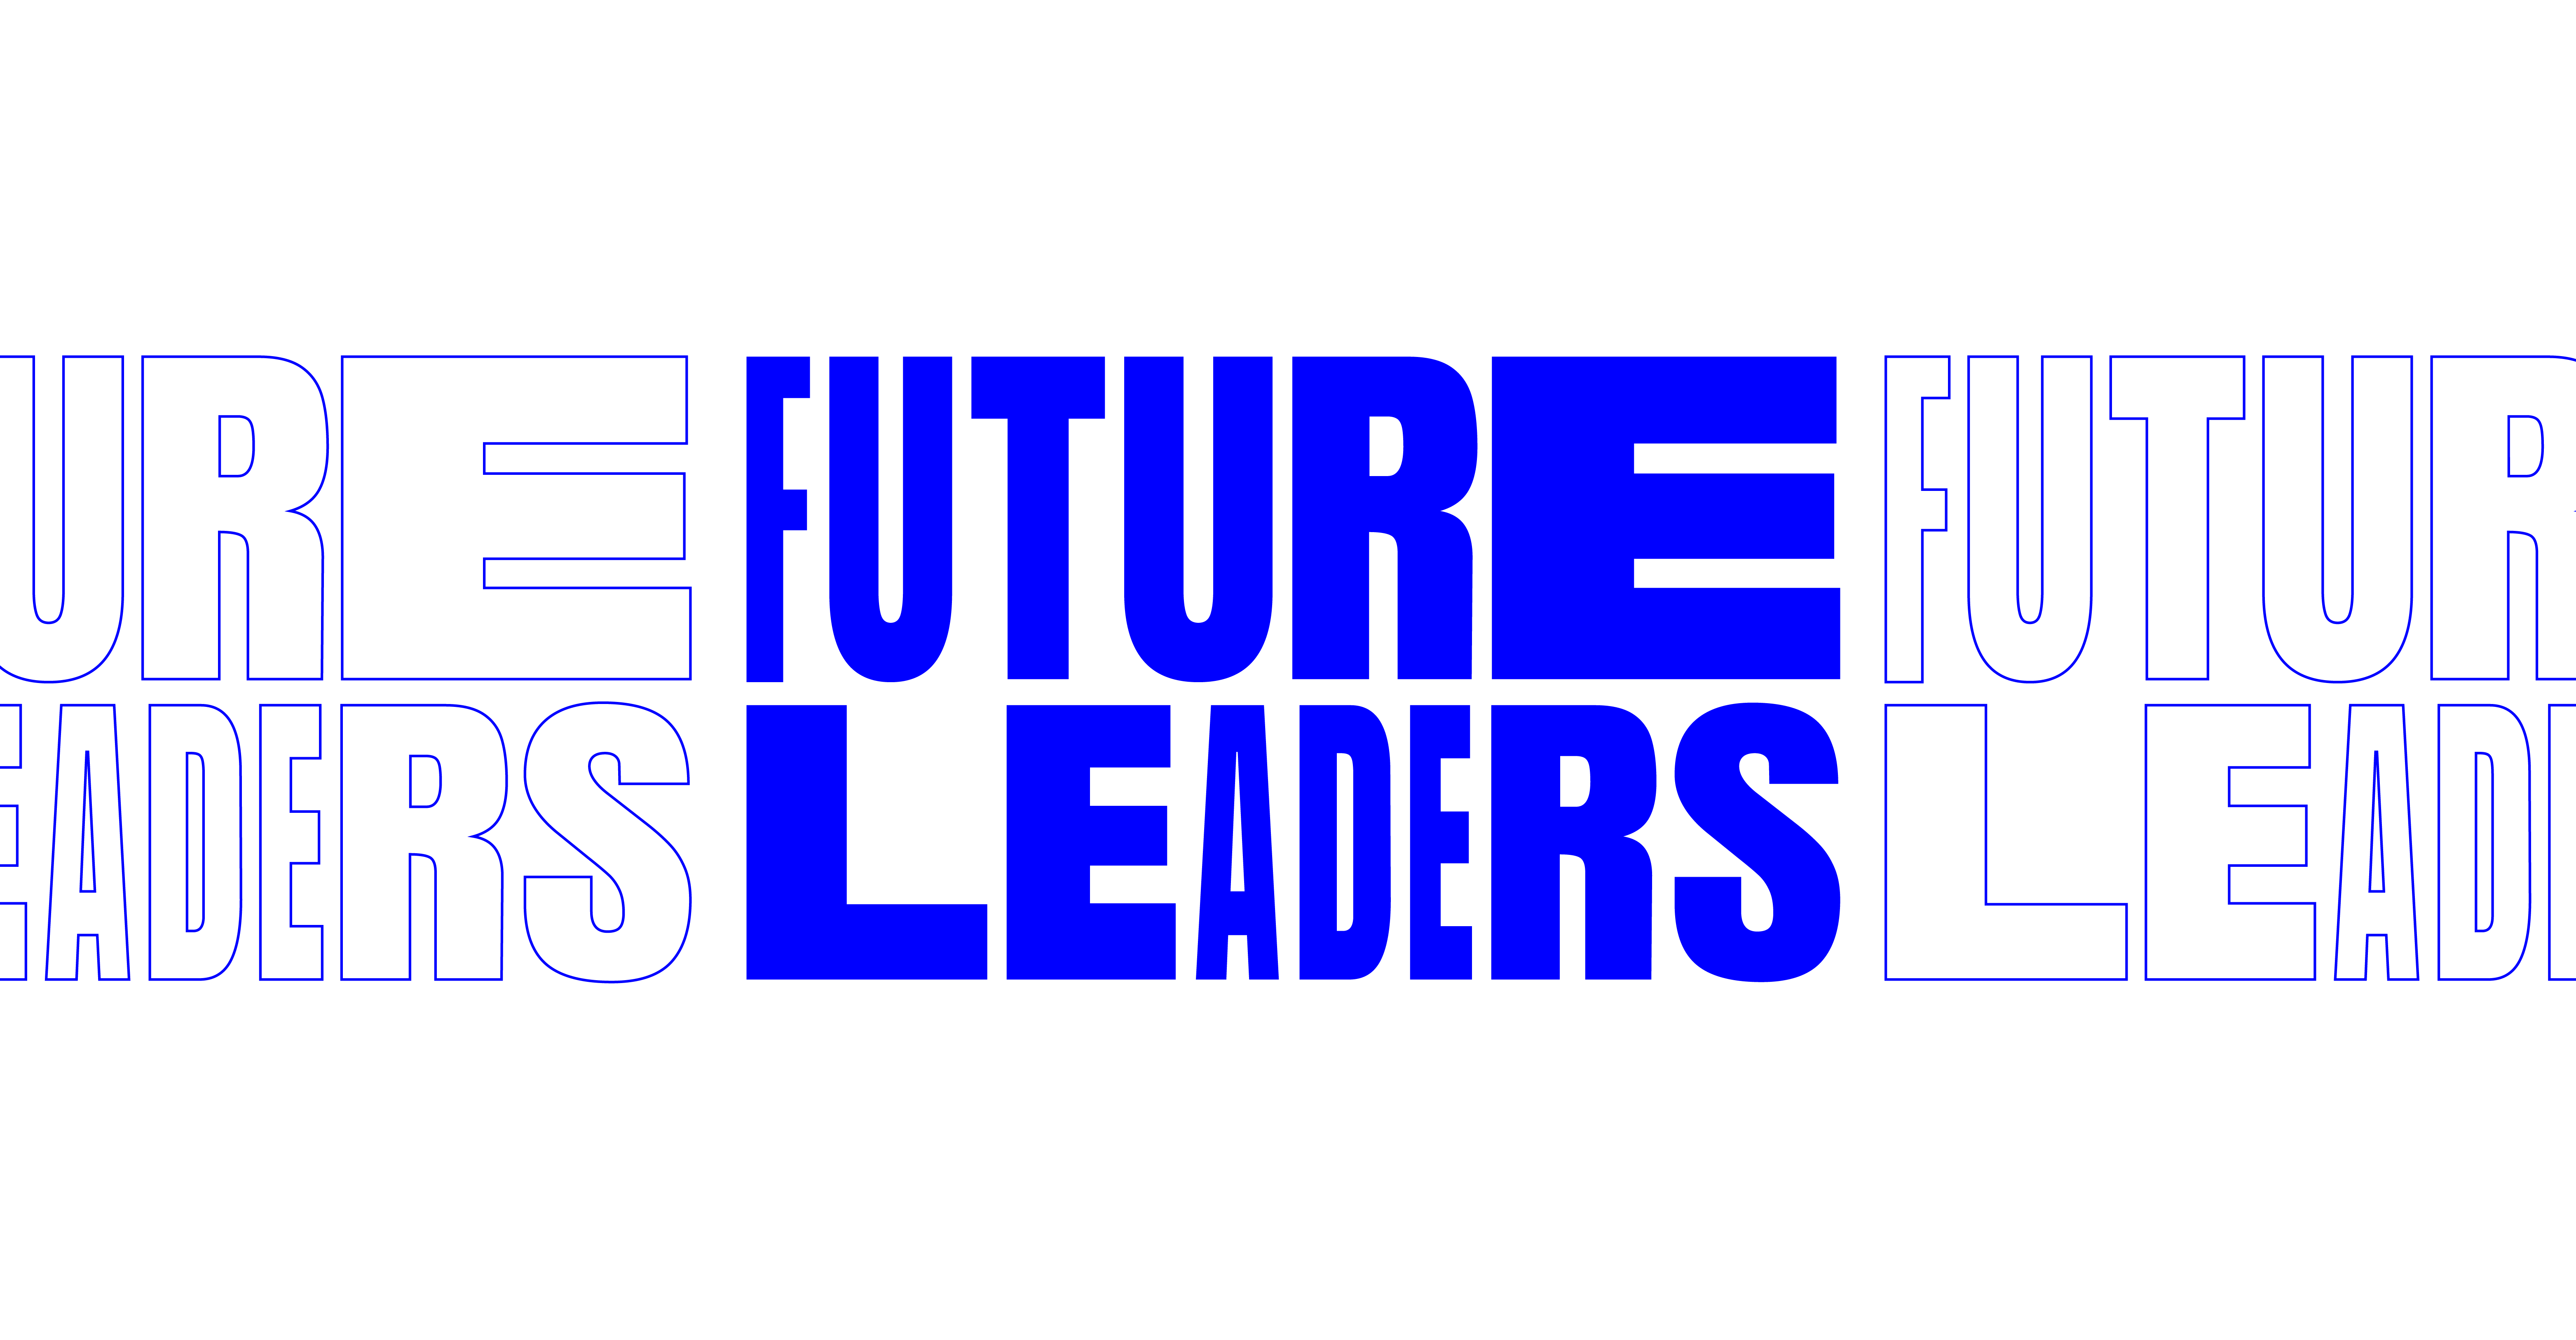 Future Leaders: the technology behind the report.